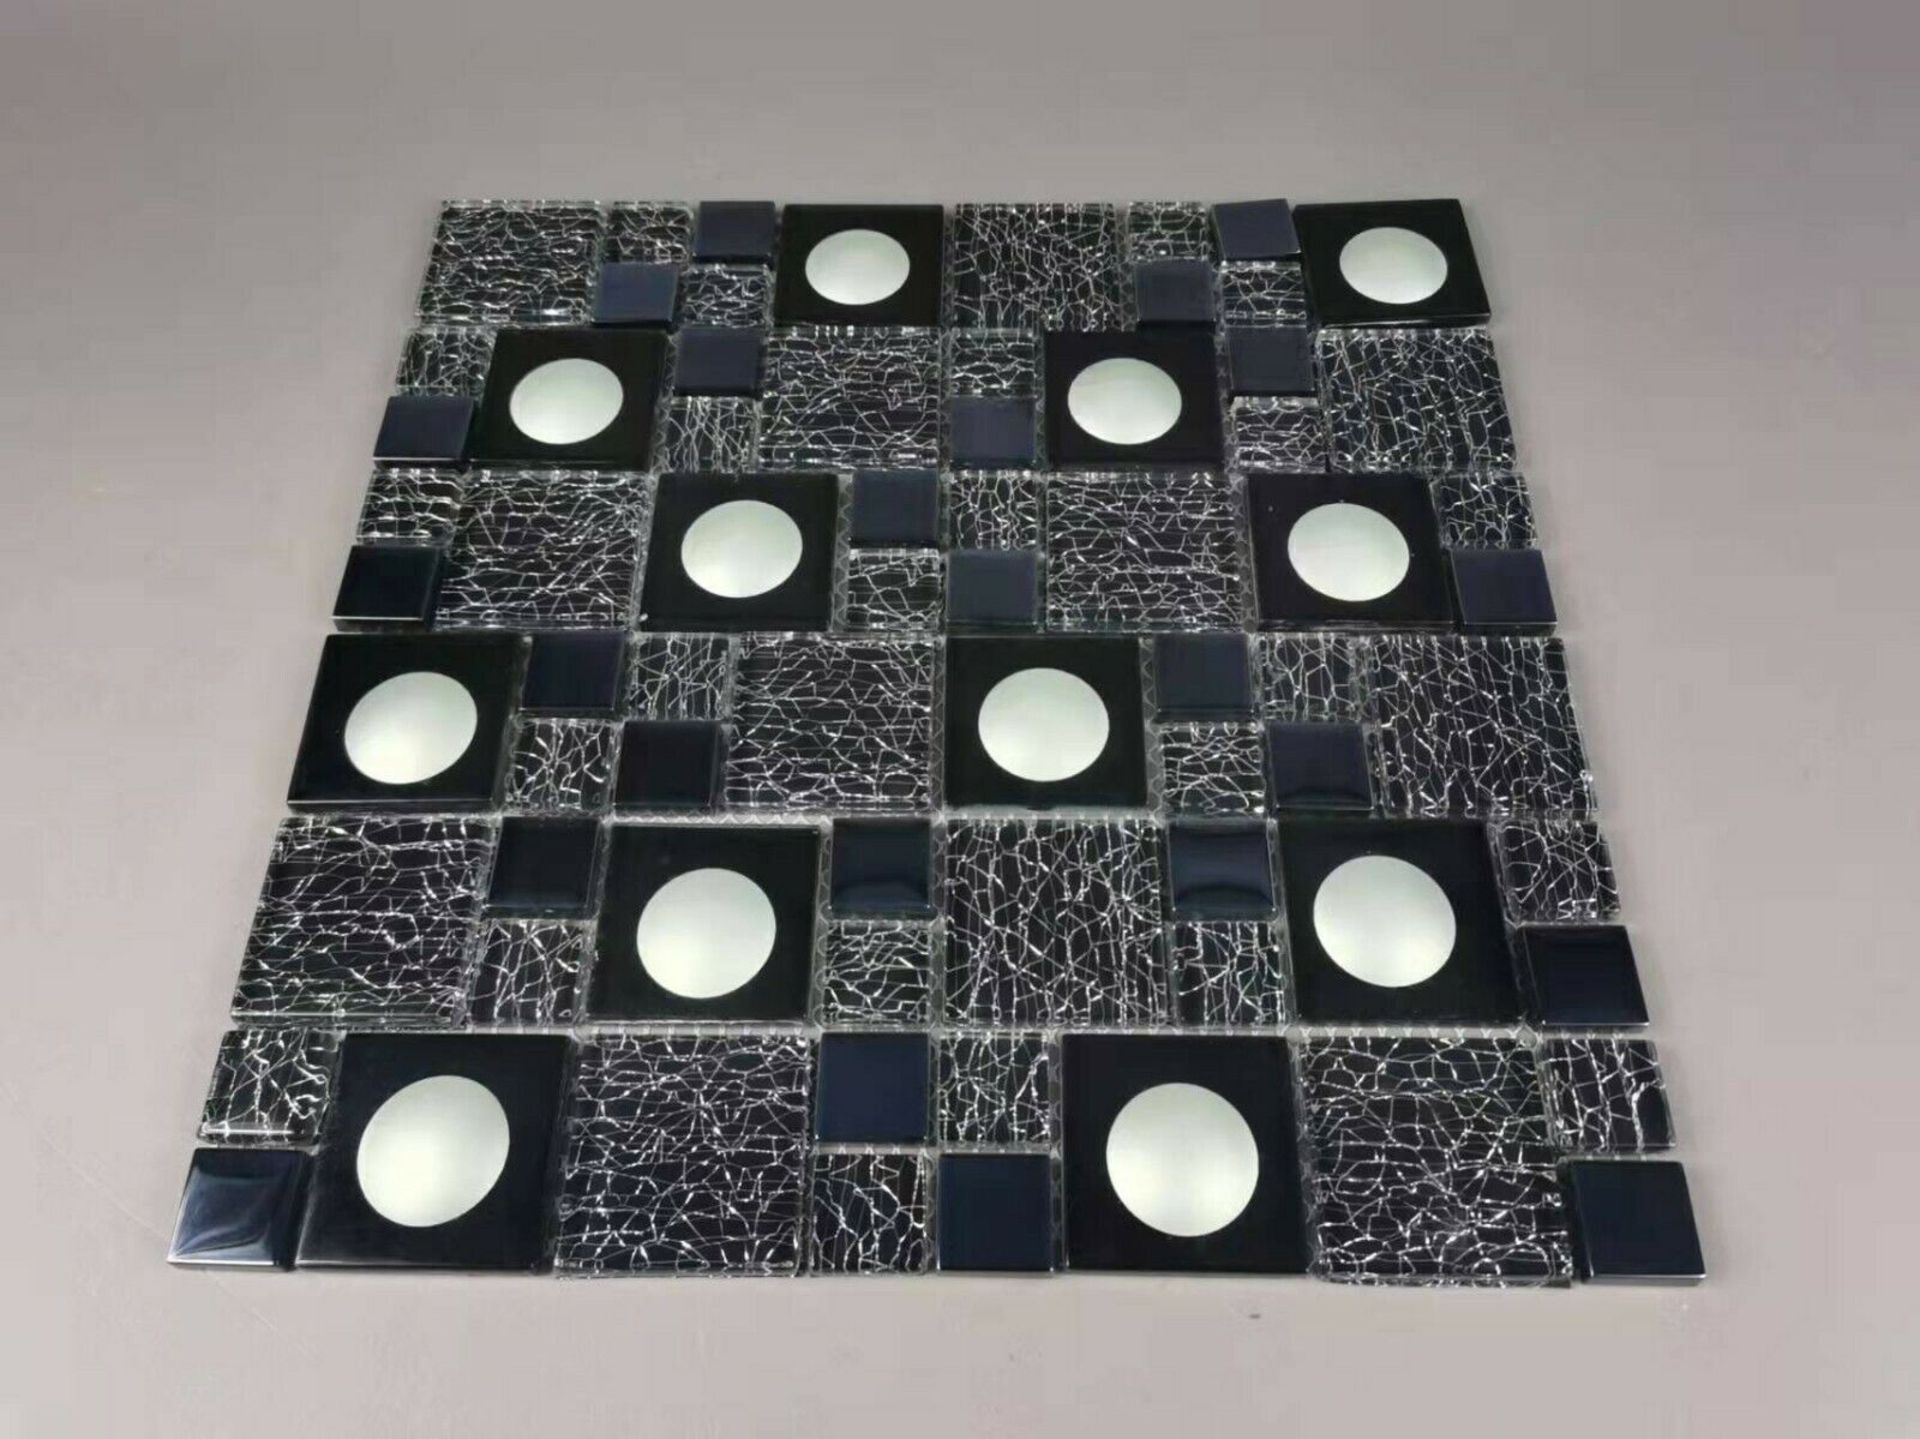 10 Square Metres - High Quality Glass/Stainless Steel Mosaic Tiles - Image 4 of 4